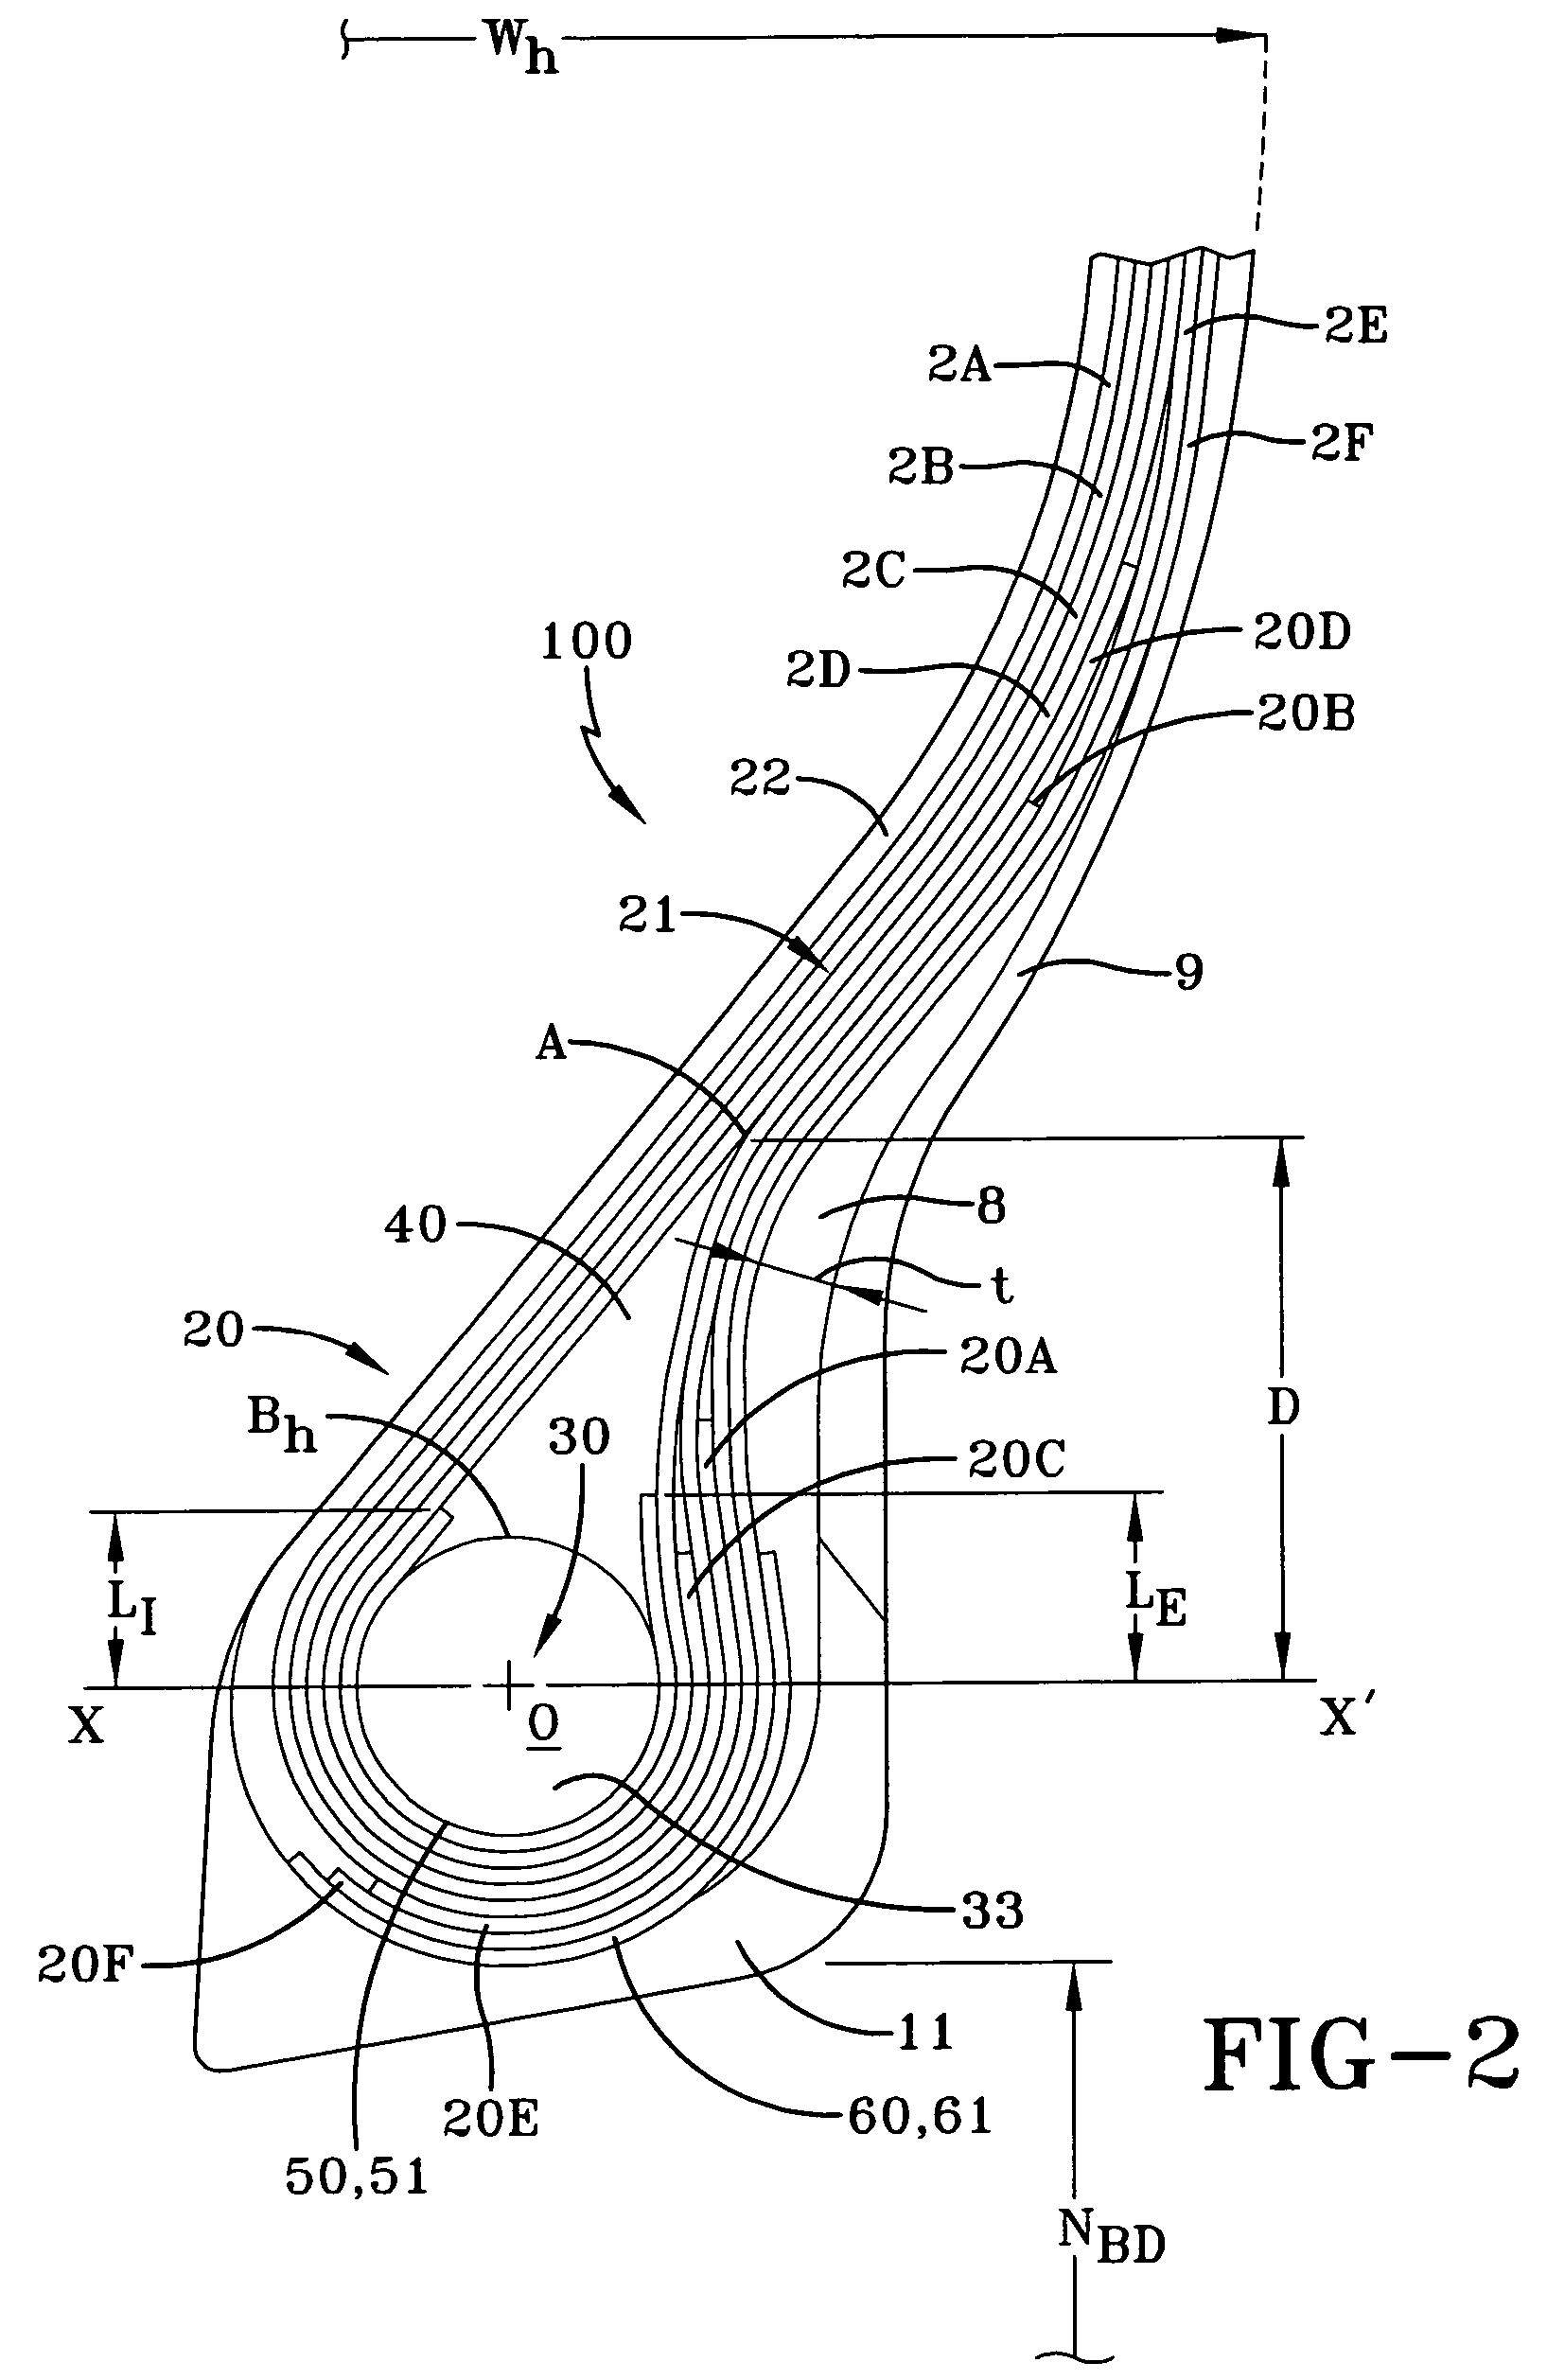 Radial tire for aircraft with specified merged cords